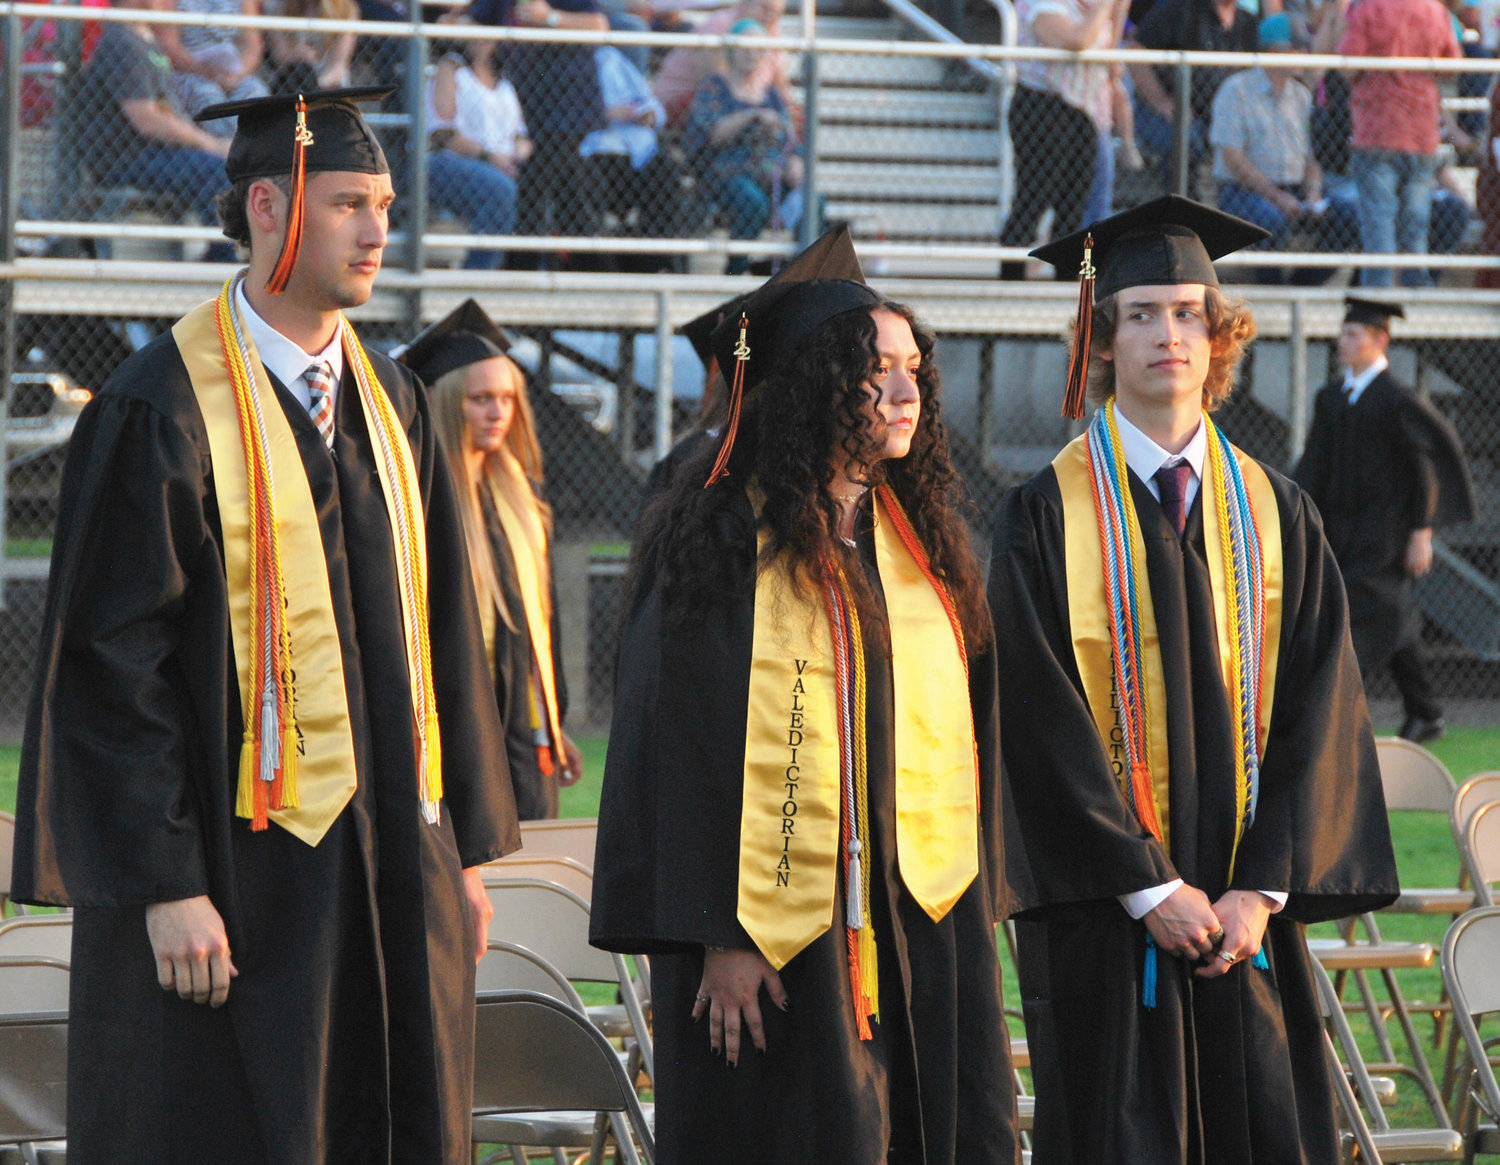 Some of Lexington’s honor students gather during graduation ceremonoes at Floyd West Field.